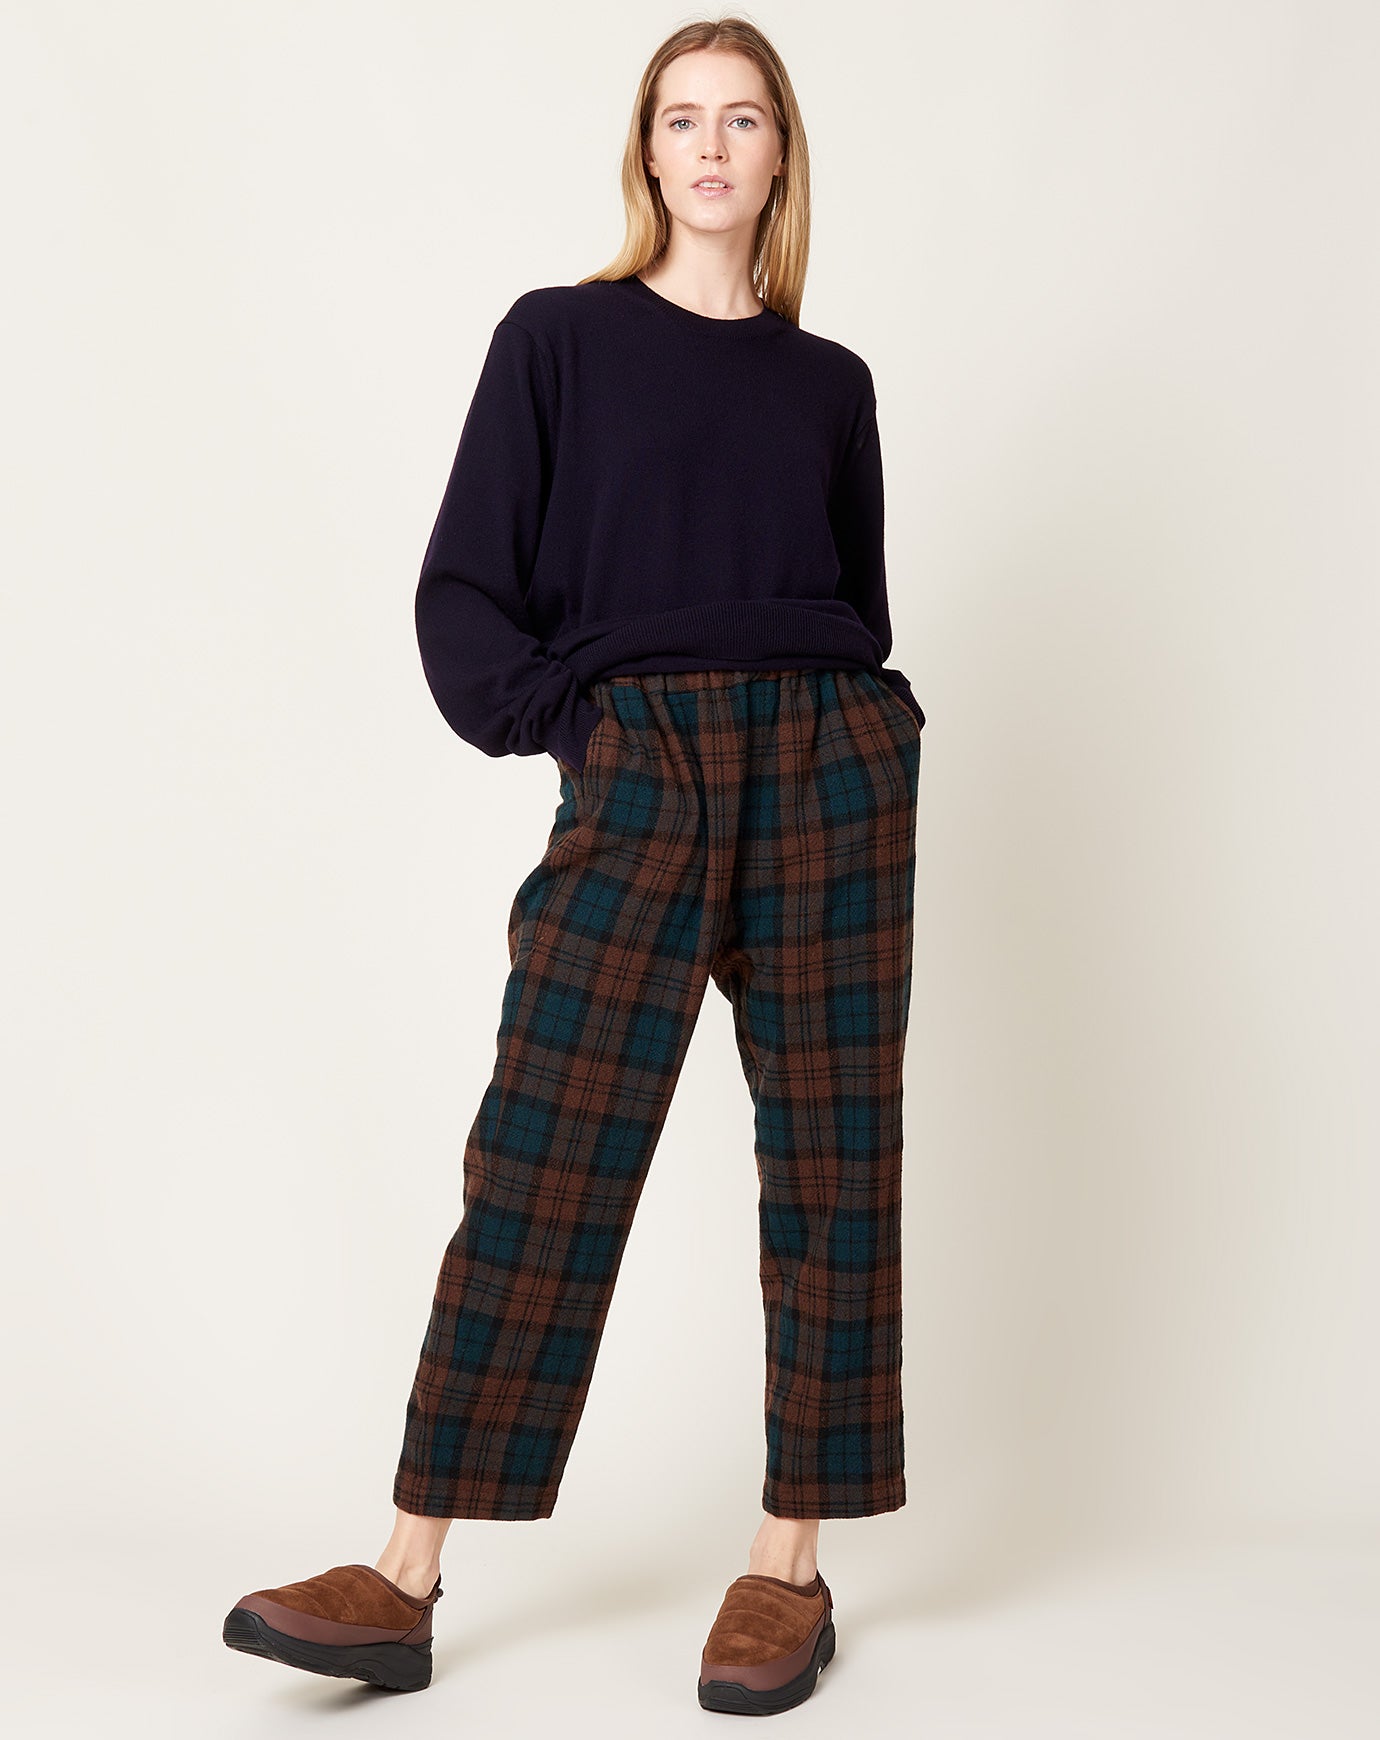 Ichi Wool Plaid Pant in Brown and Green